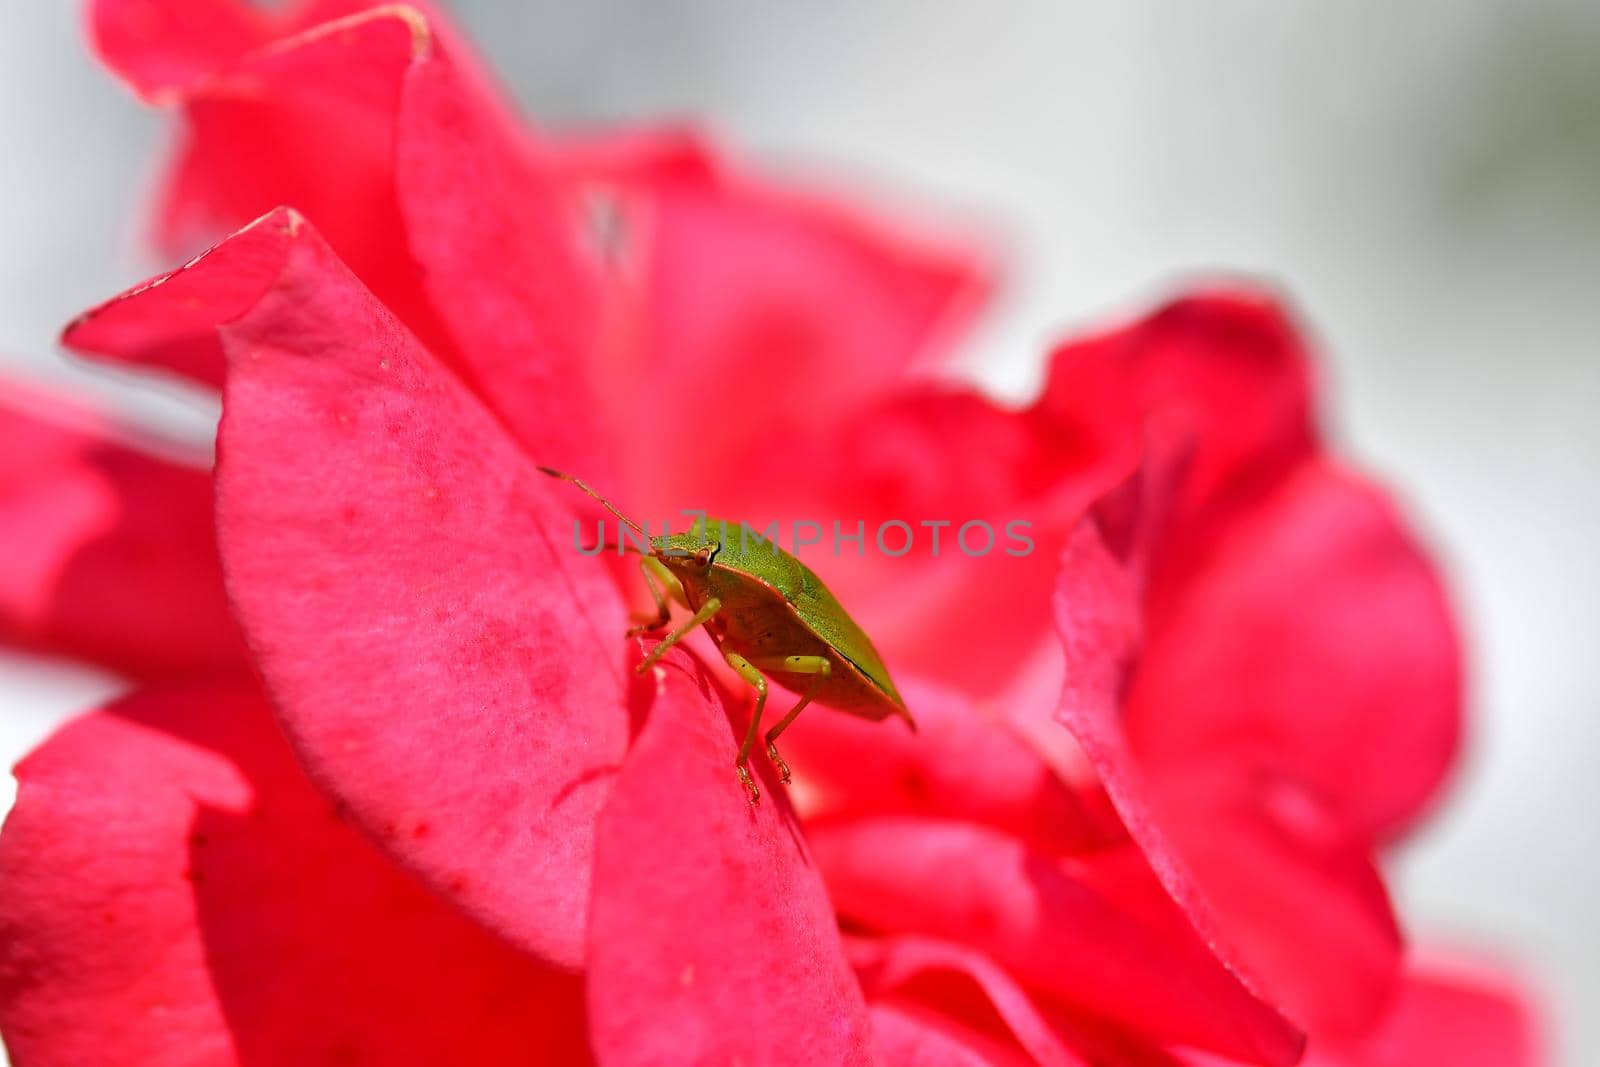 green shield bug, nymph on a rose flower